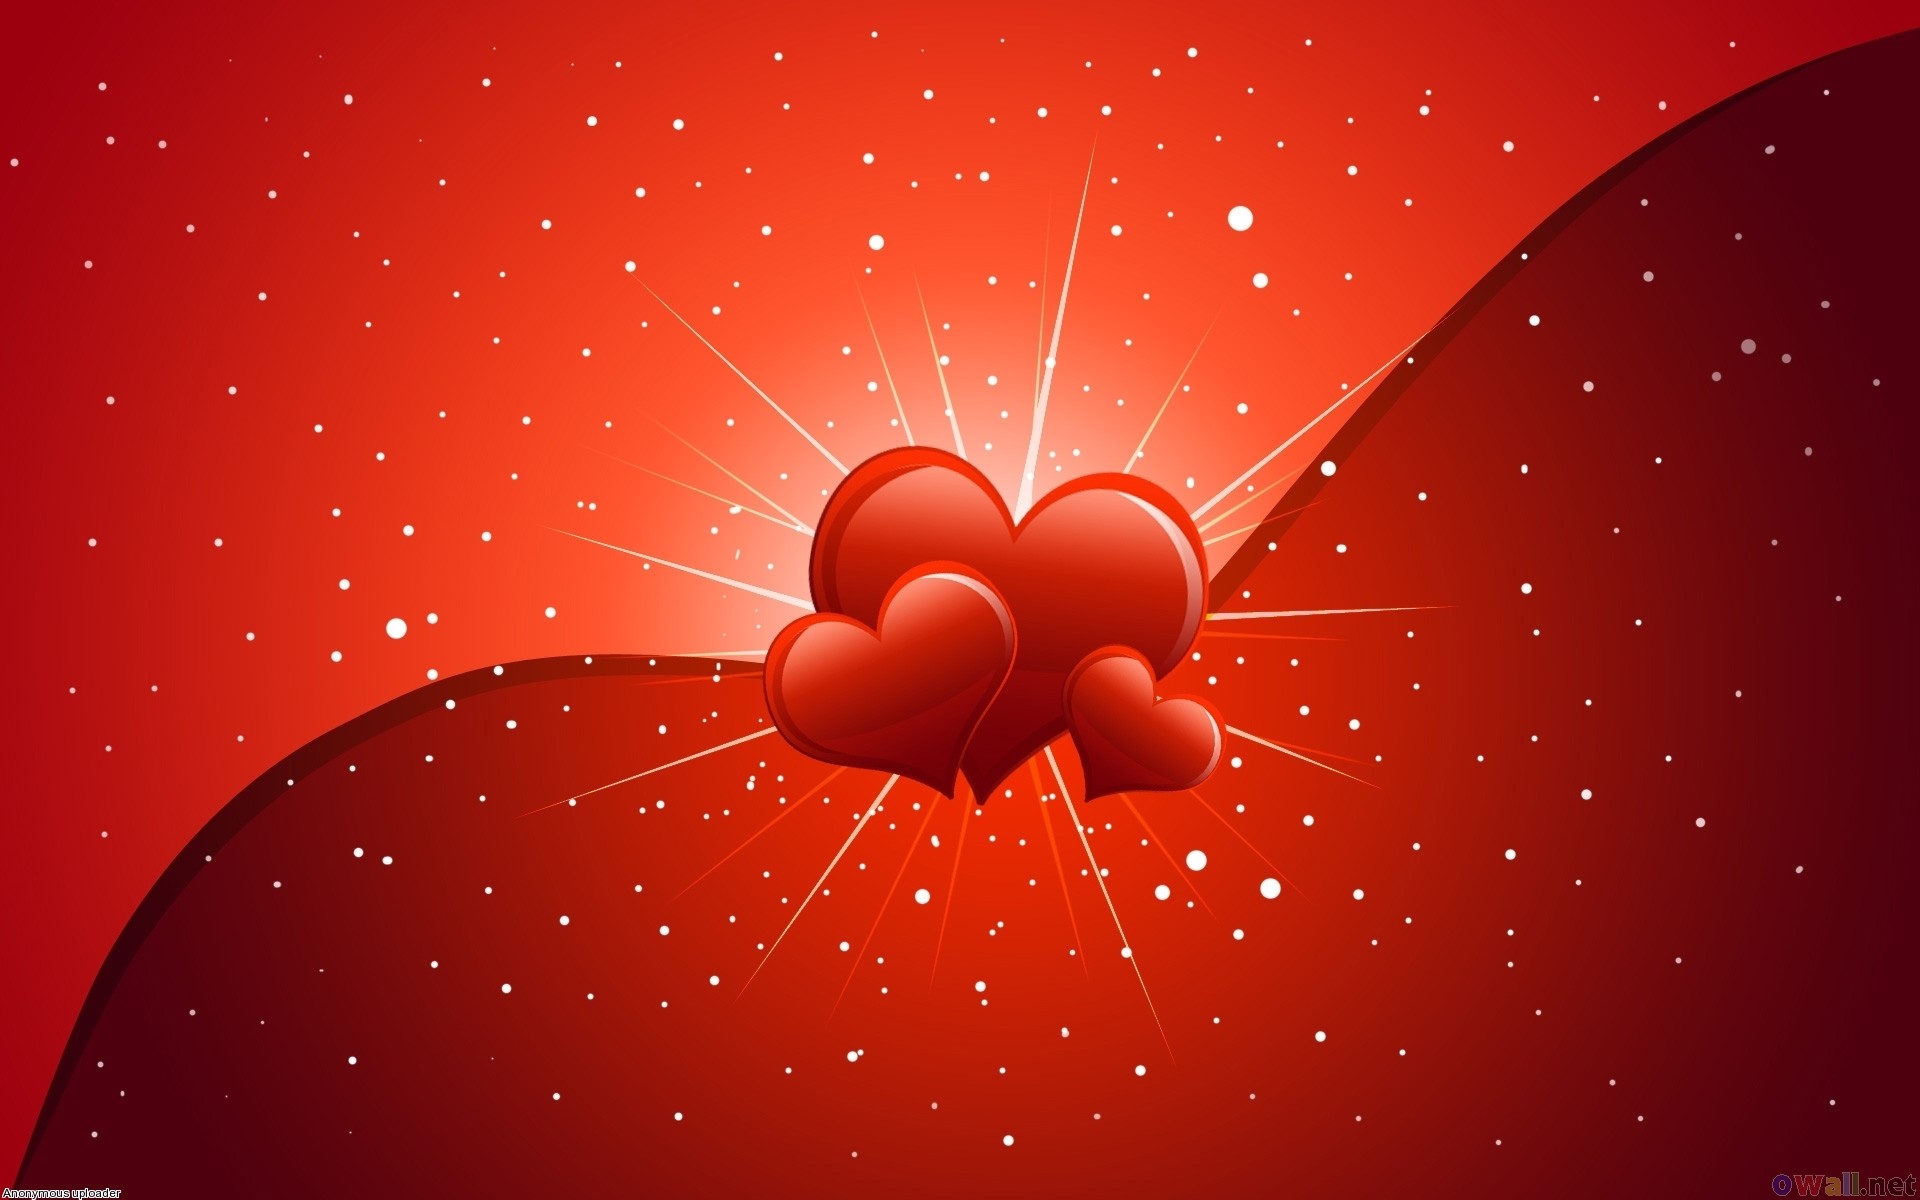 1920x1200 Love Hearts Backgrounds wallpaper images about â«Jewel Heart Wallpaperâ« on  Pinterest iPhone 